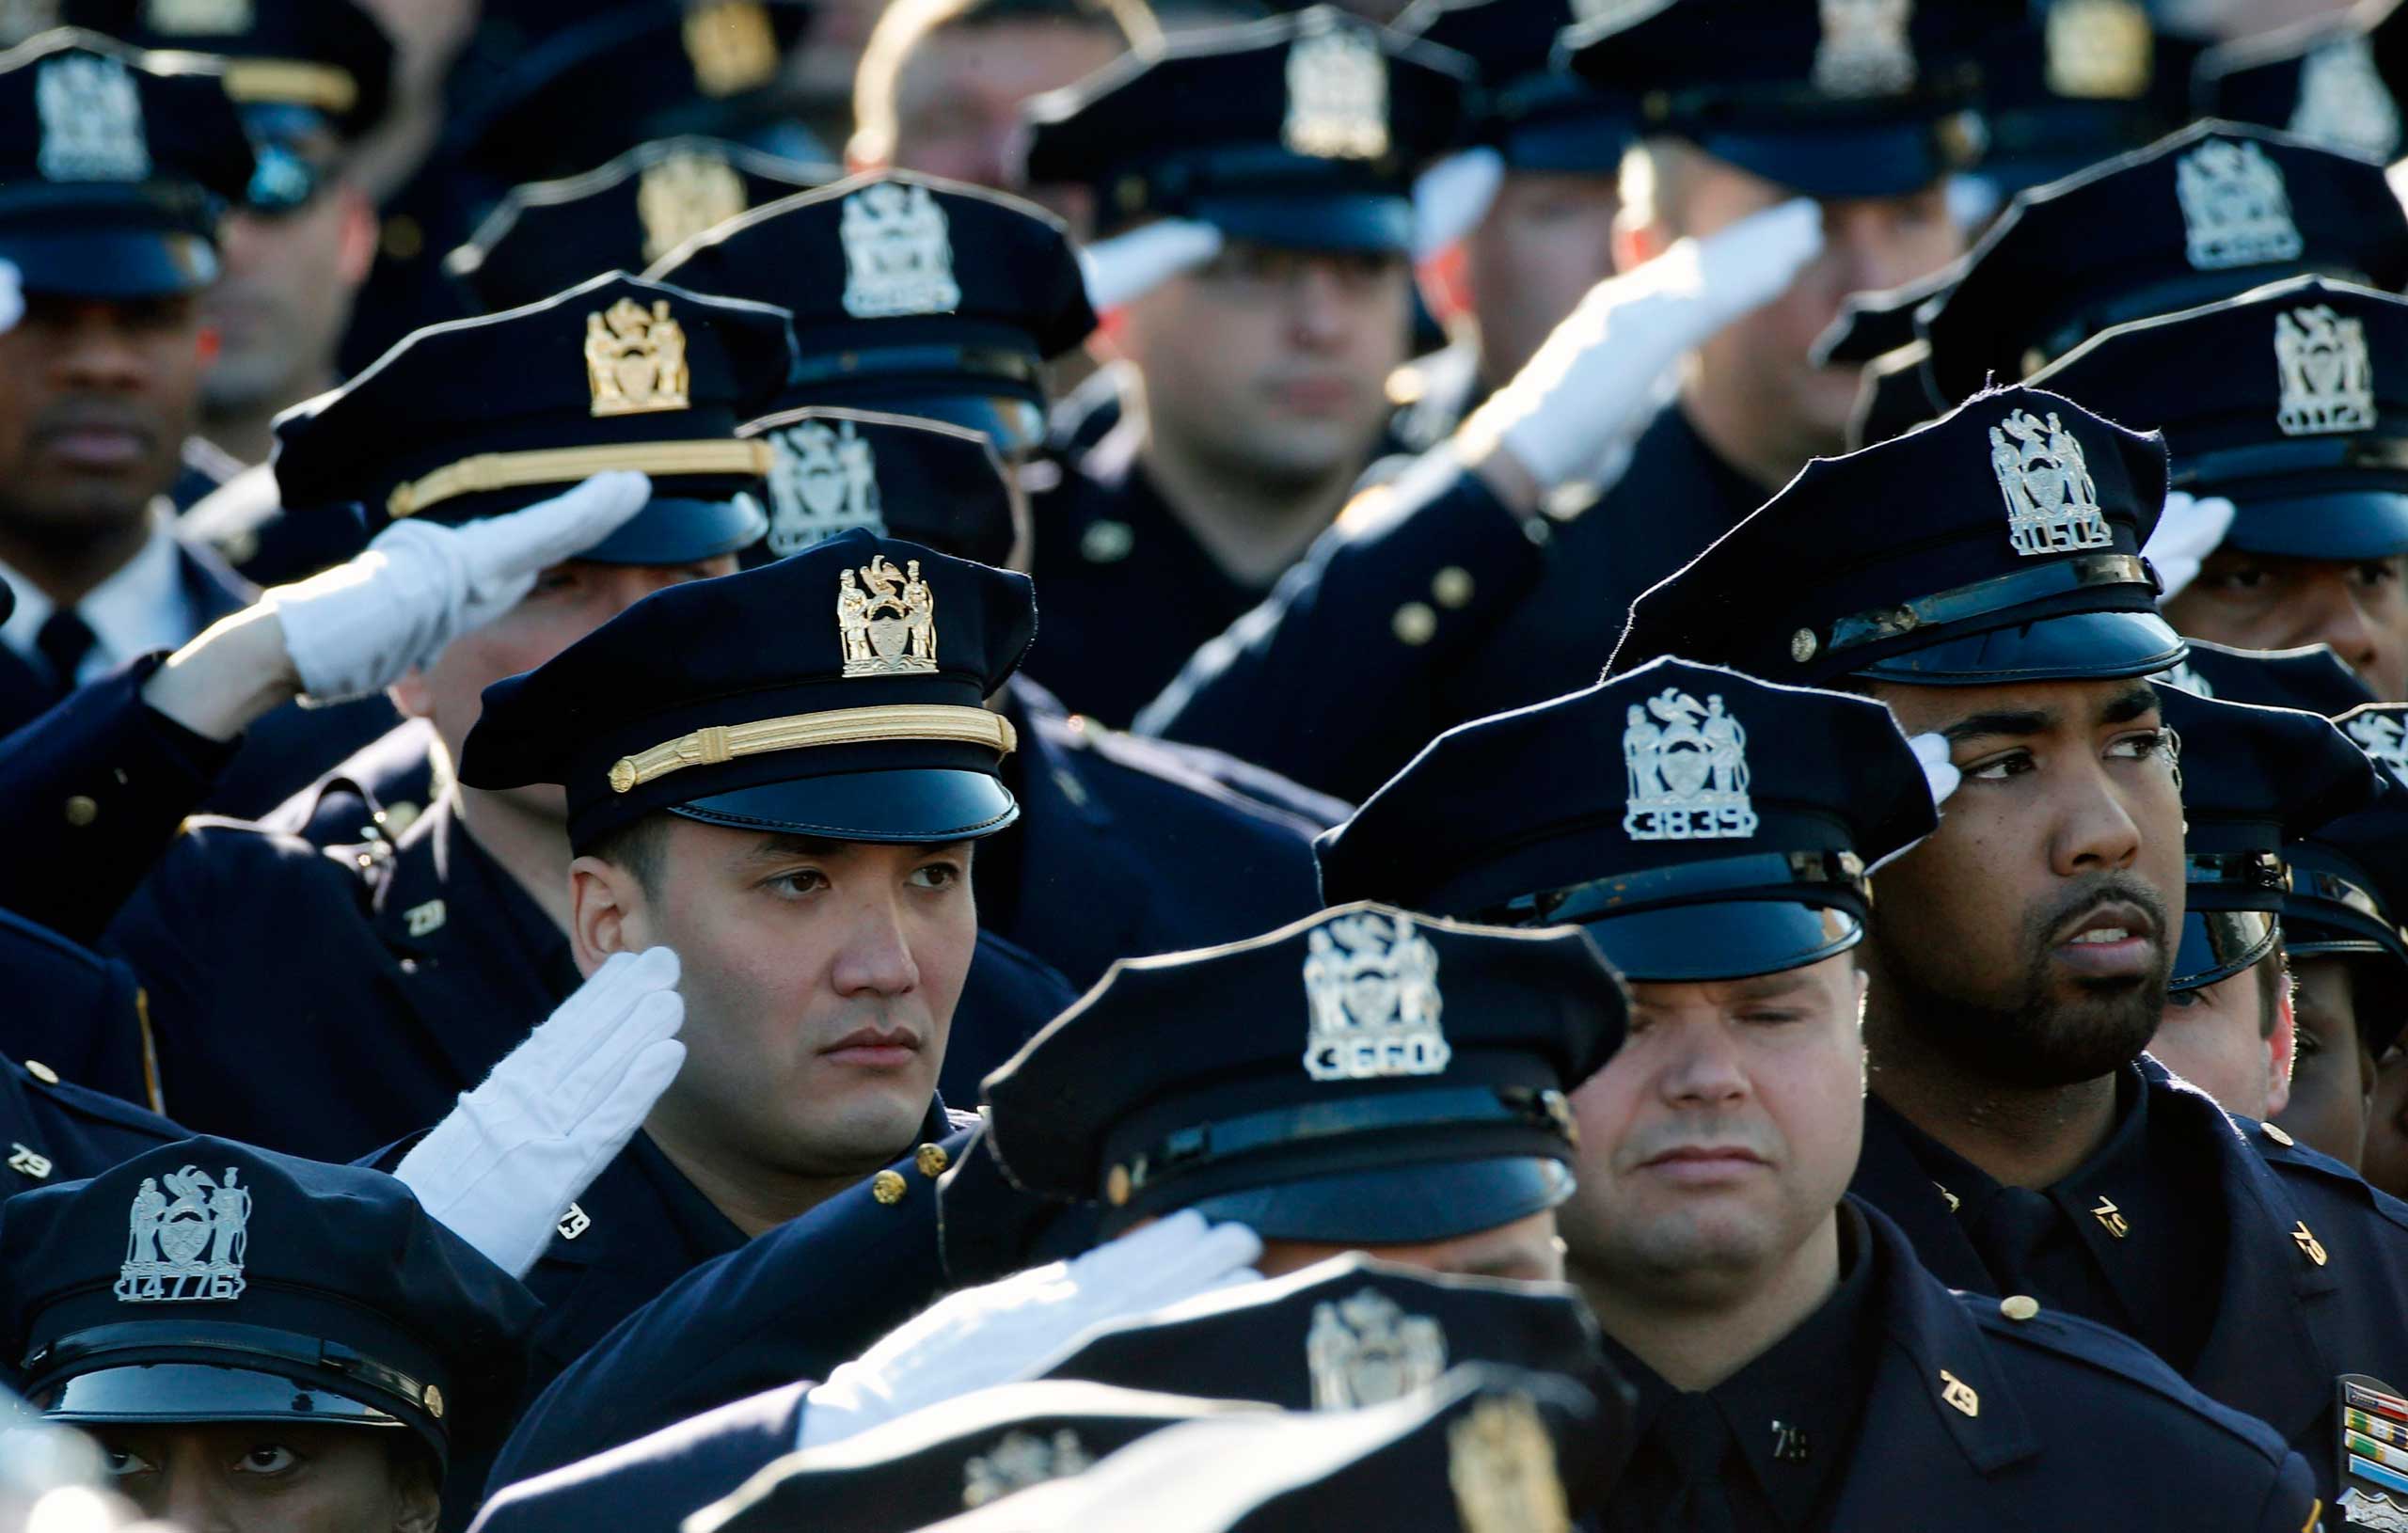 Police salute during the playing of the U.S. National Anthem outside the Christ Tabernacle Church at the start of the funeral service for slain New York Police Department (NYPD) officer Rafael Ramos in the Queens borough of New York Dec. 27, 2014. (Mike Segar—Reuters)